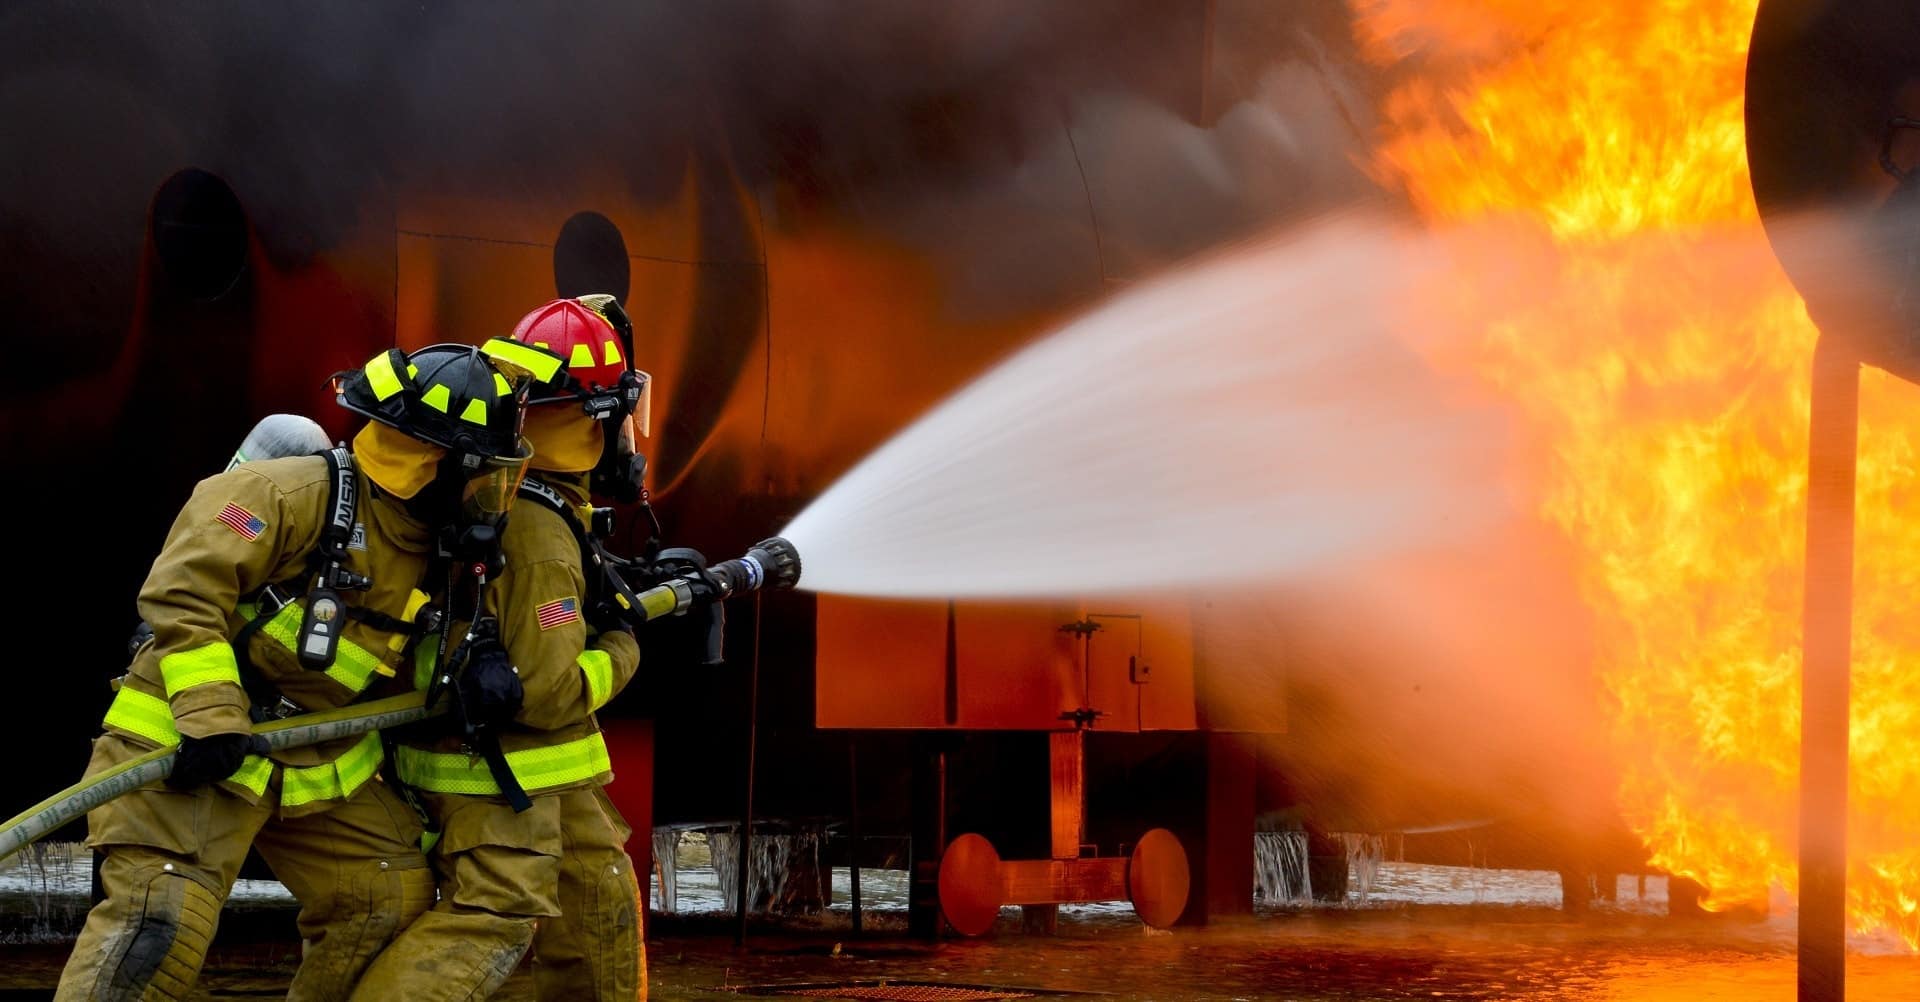 Fire Safety Personnel trying to quench fire. Credit to Pexel pictures